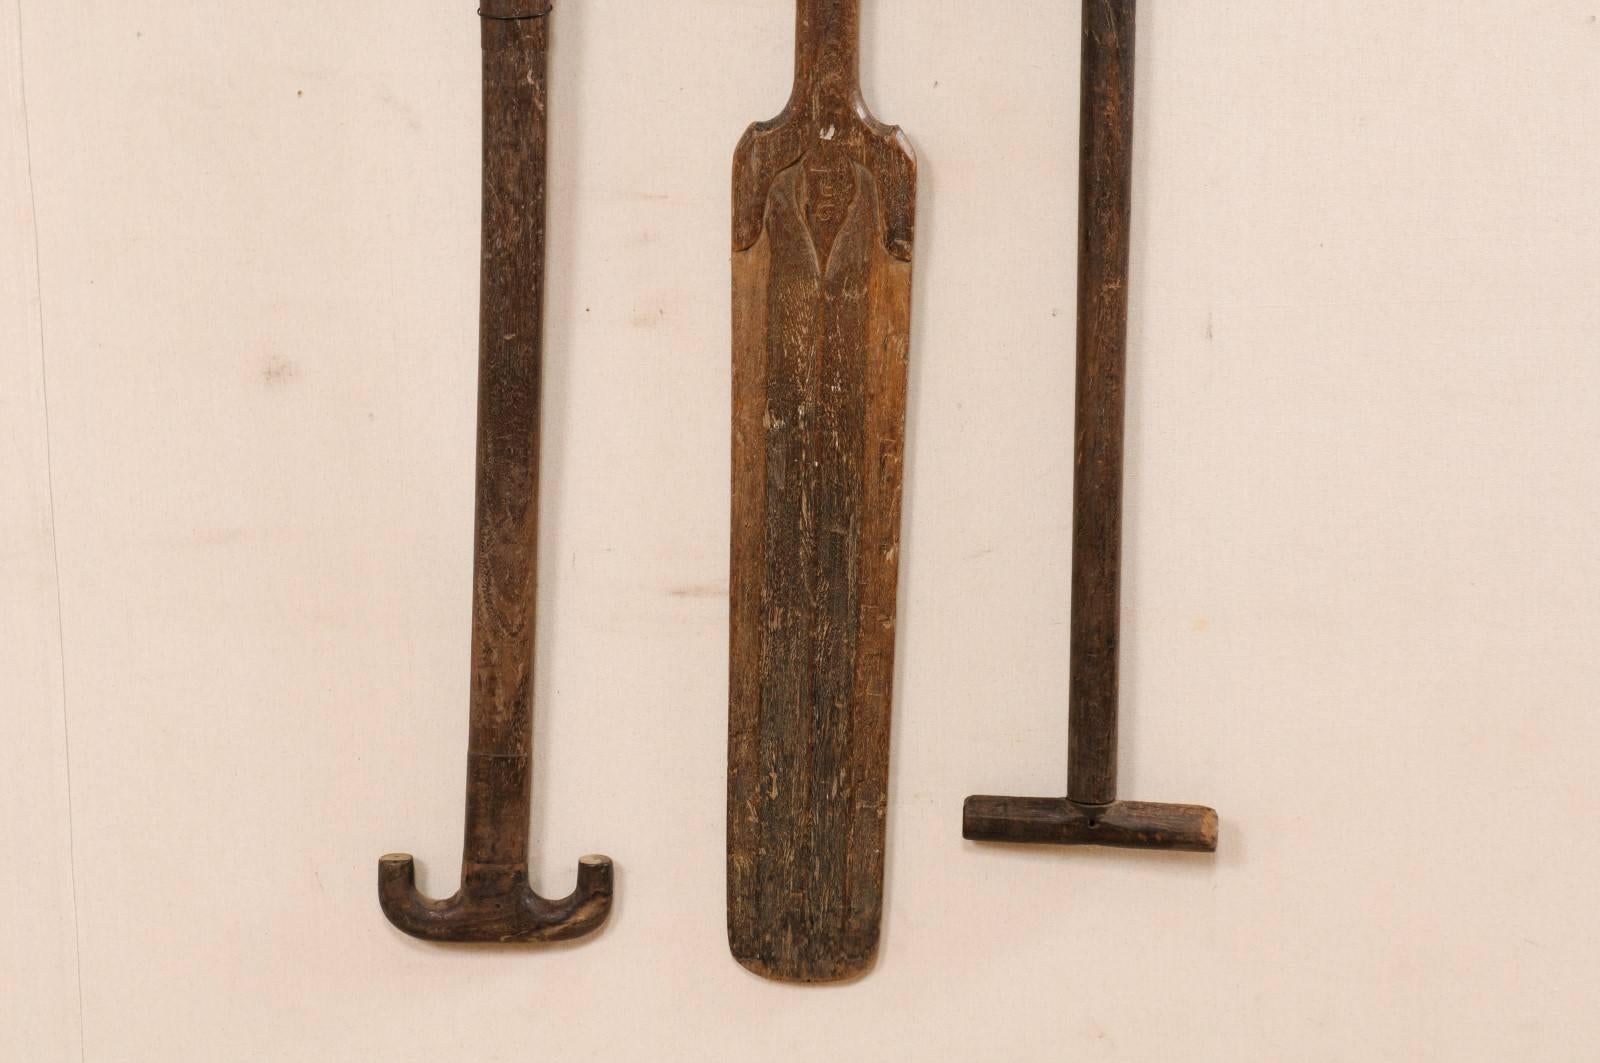 Indian Set of Three Hand-Carved Wooden Boat Prows from Kerala, South India